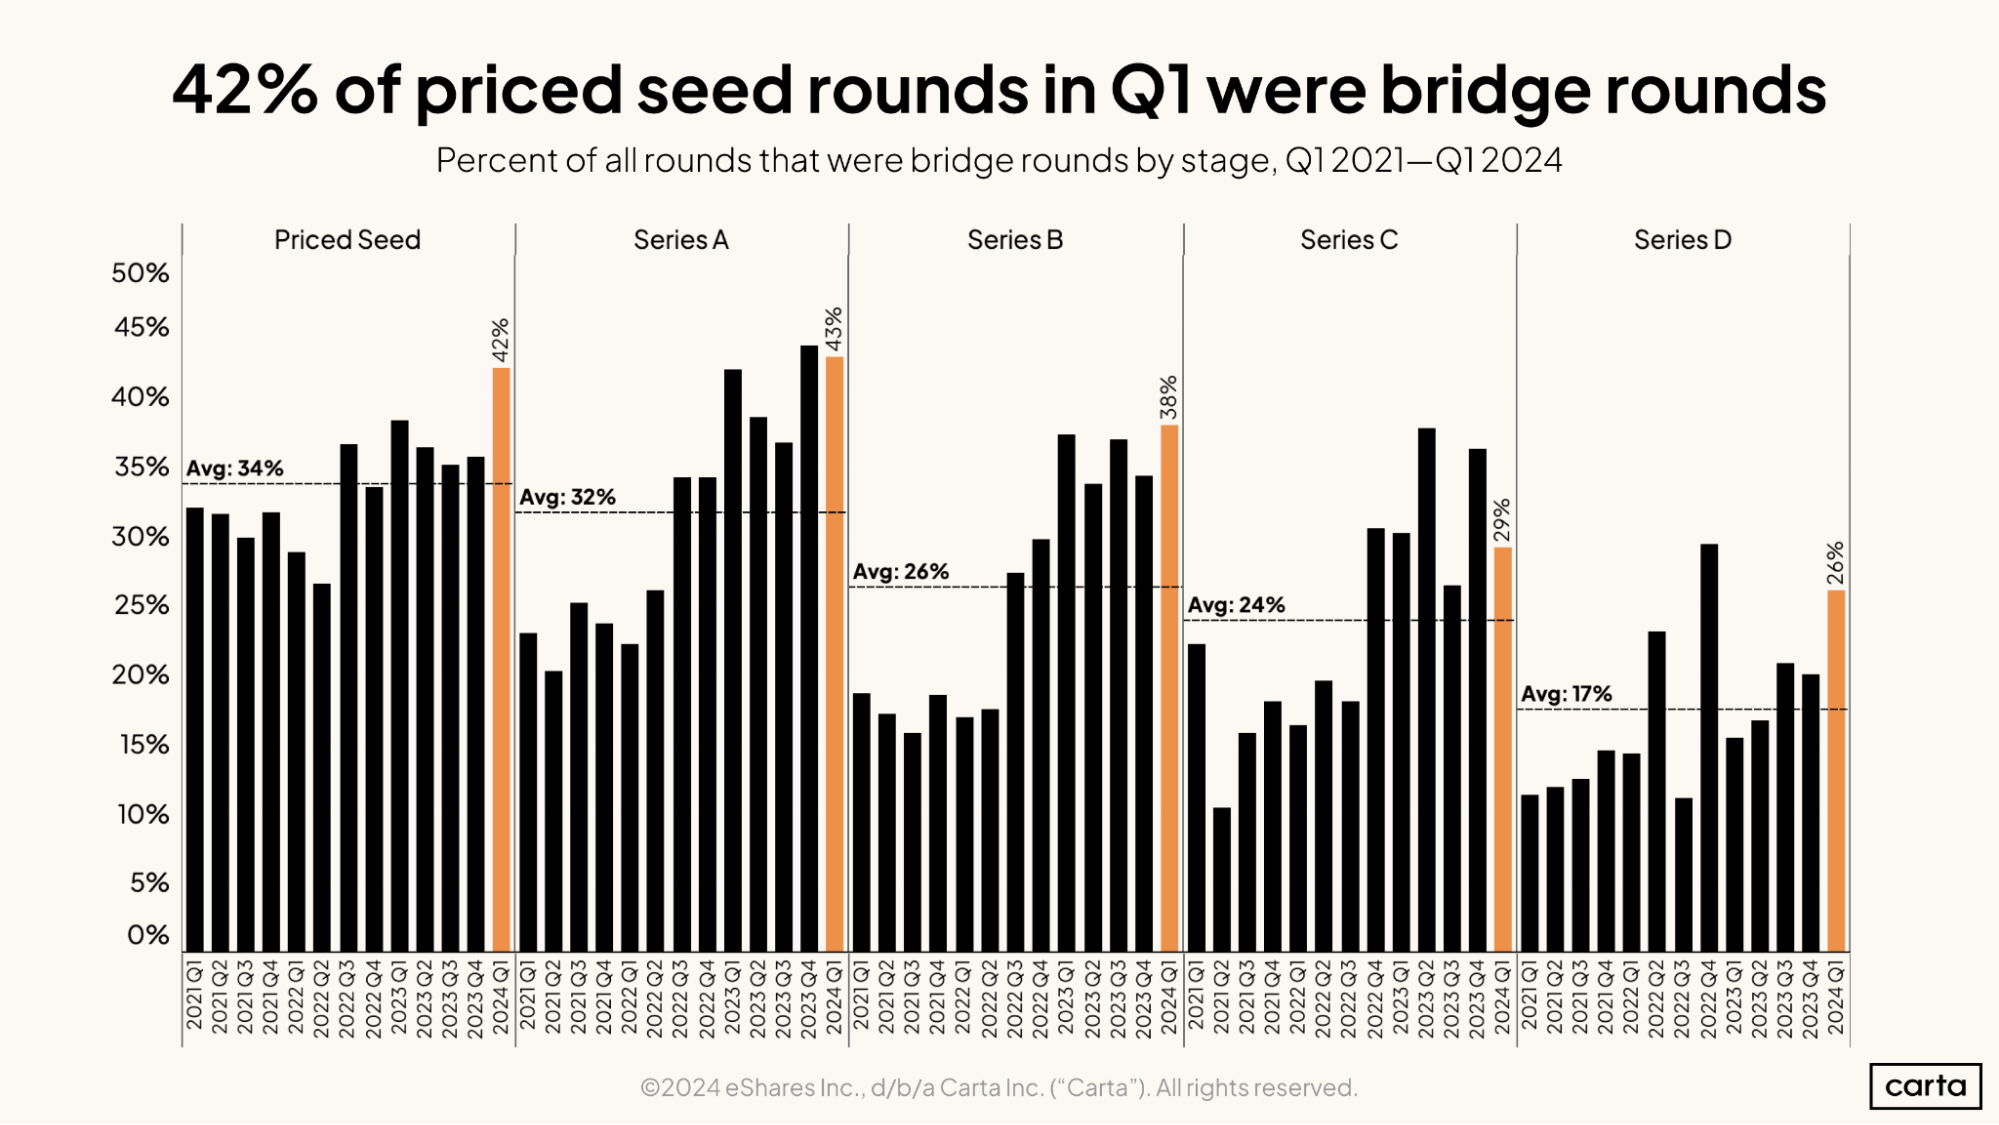 42 percent of priced seed rounds in Q1 were bridge rounds